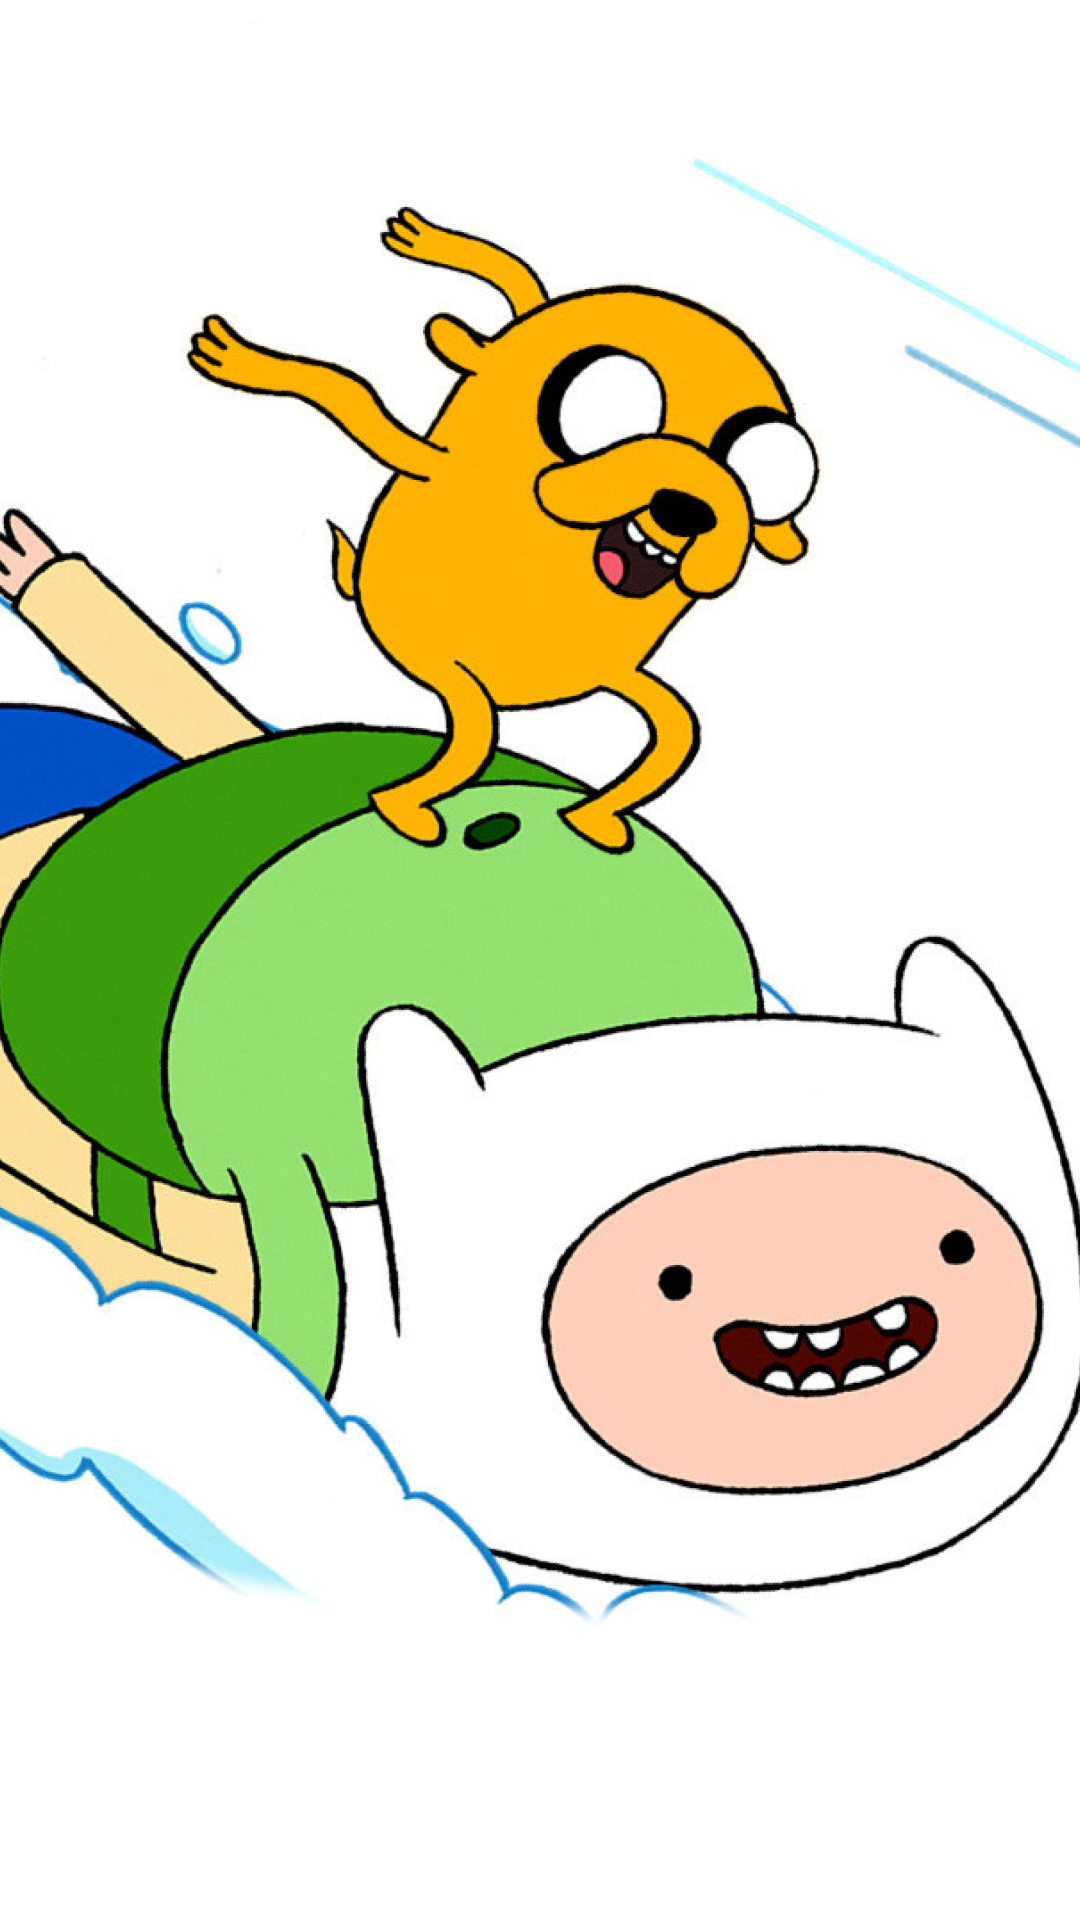 Adventure Time Wallpapers for Iphone 7 Iphone 7 plus